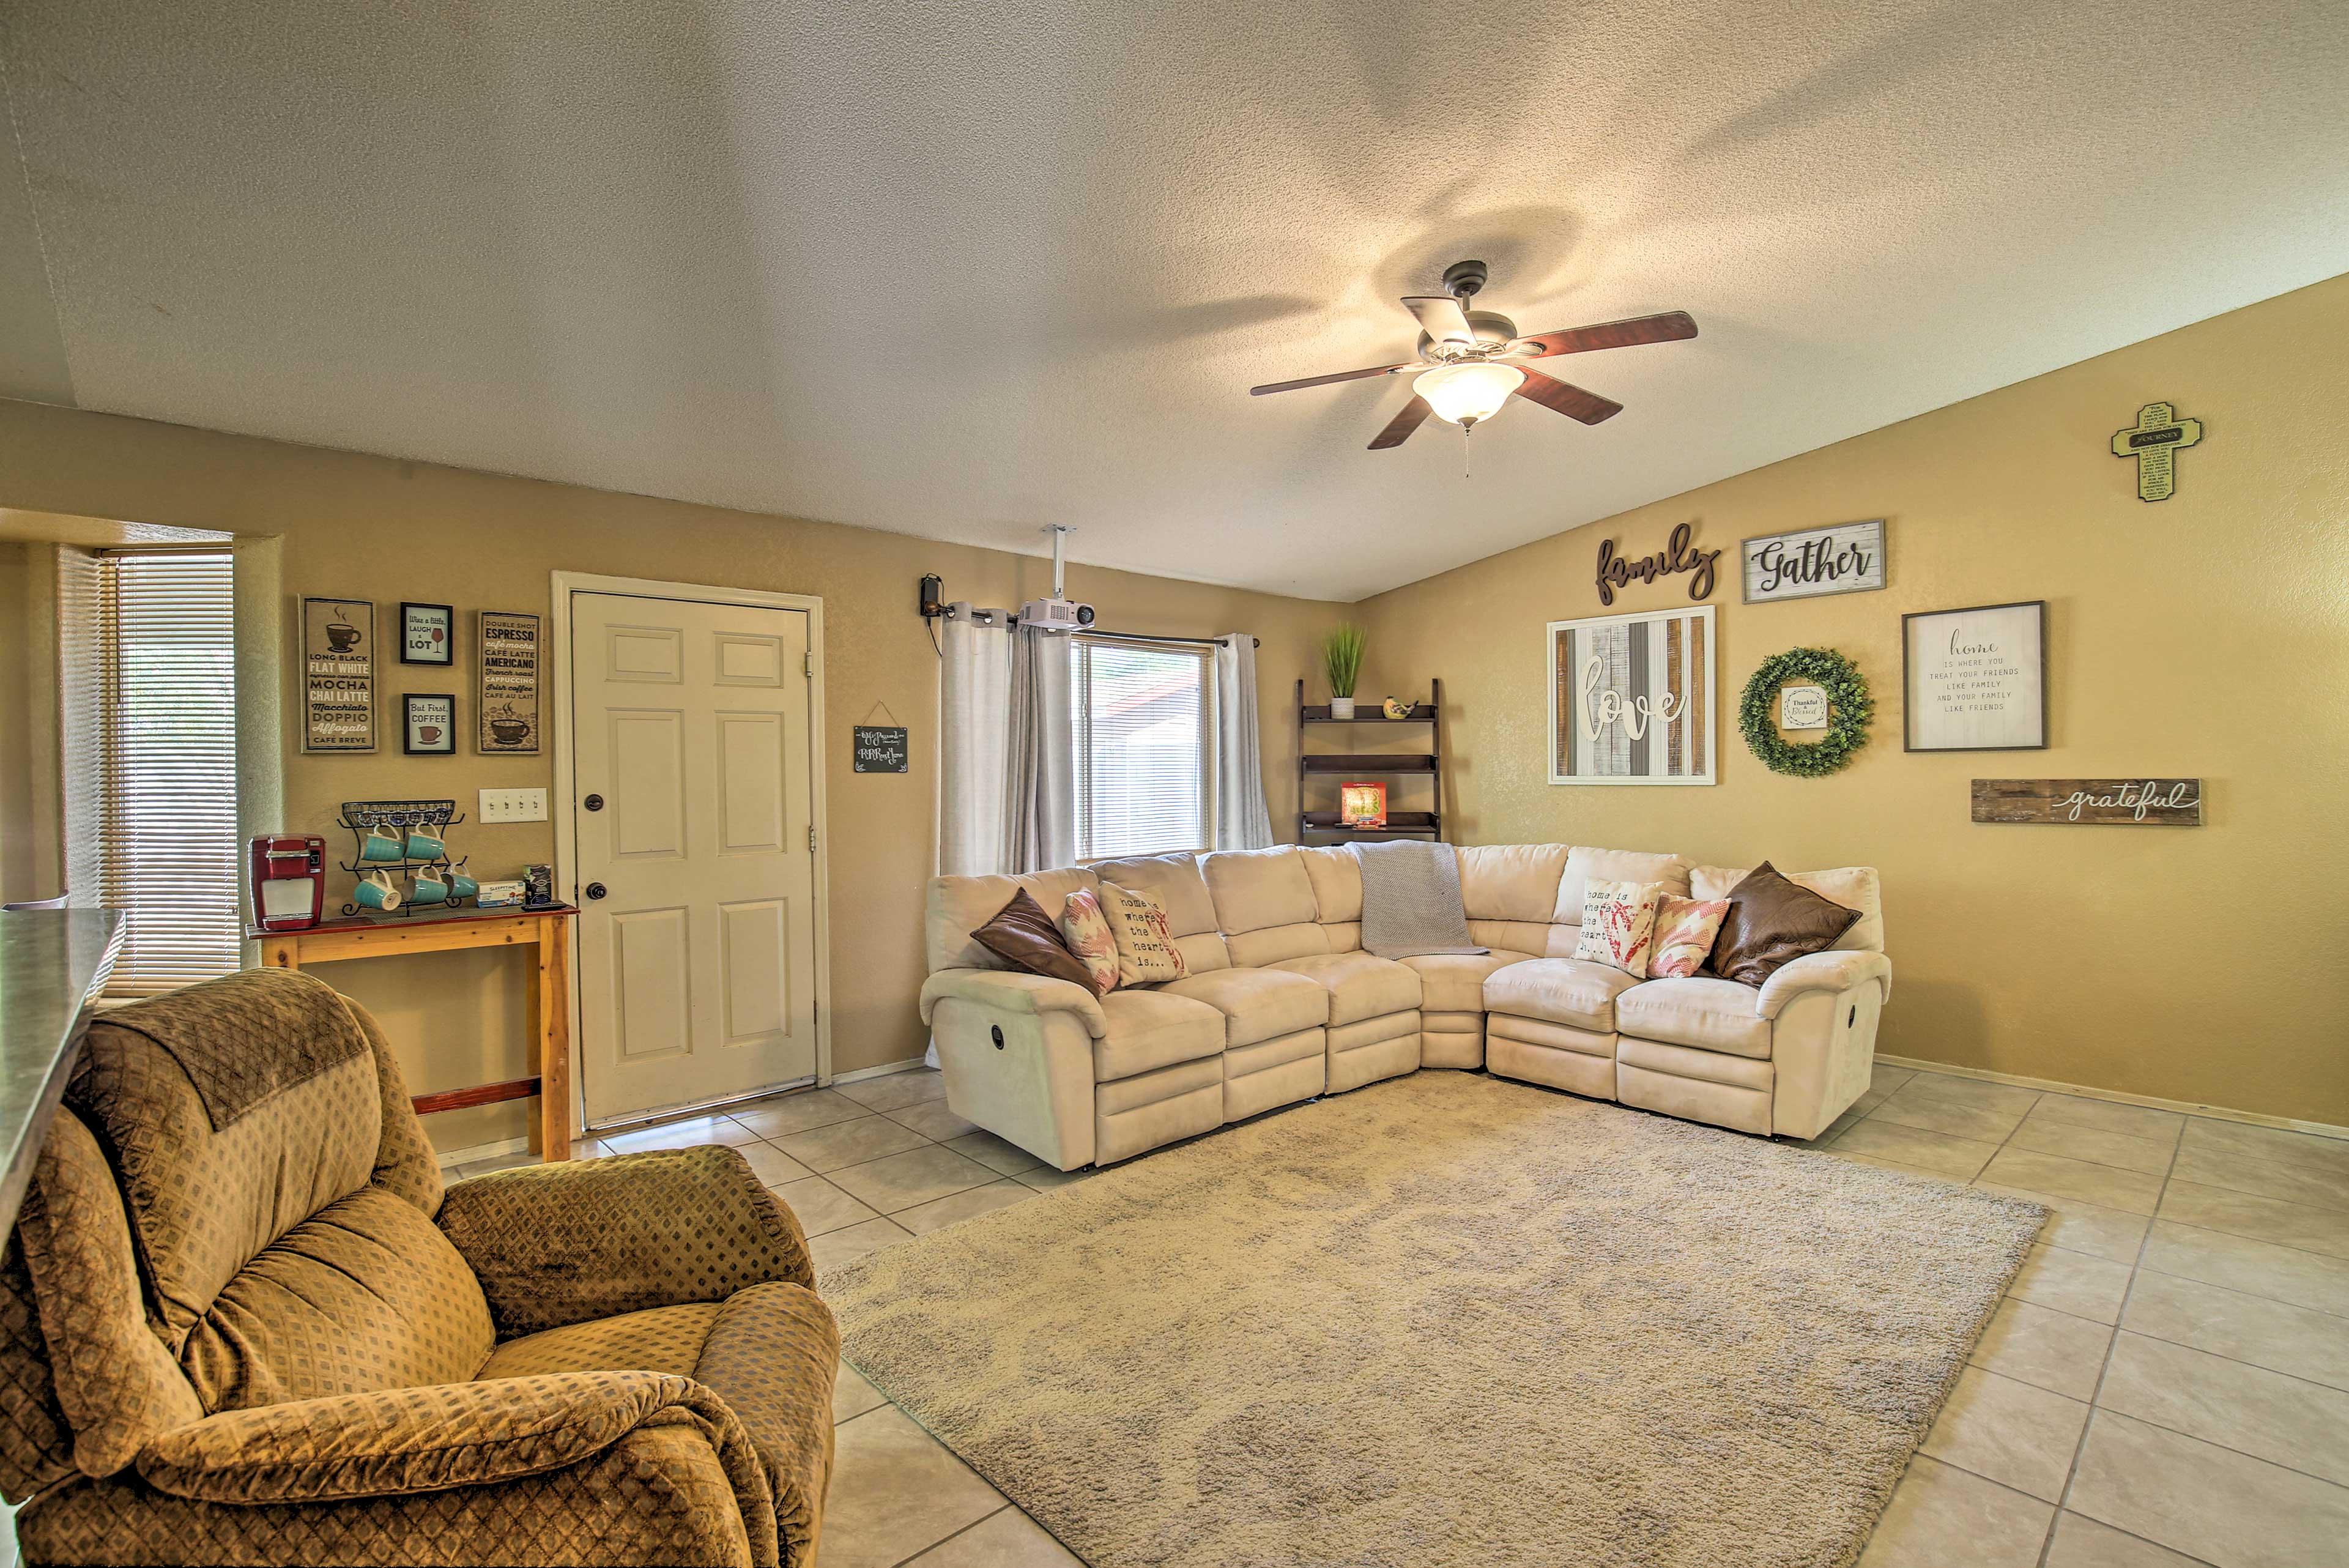 This 3-bedroom, 2-bathroom home has space for up to 6!